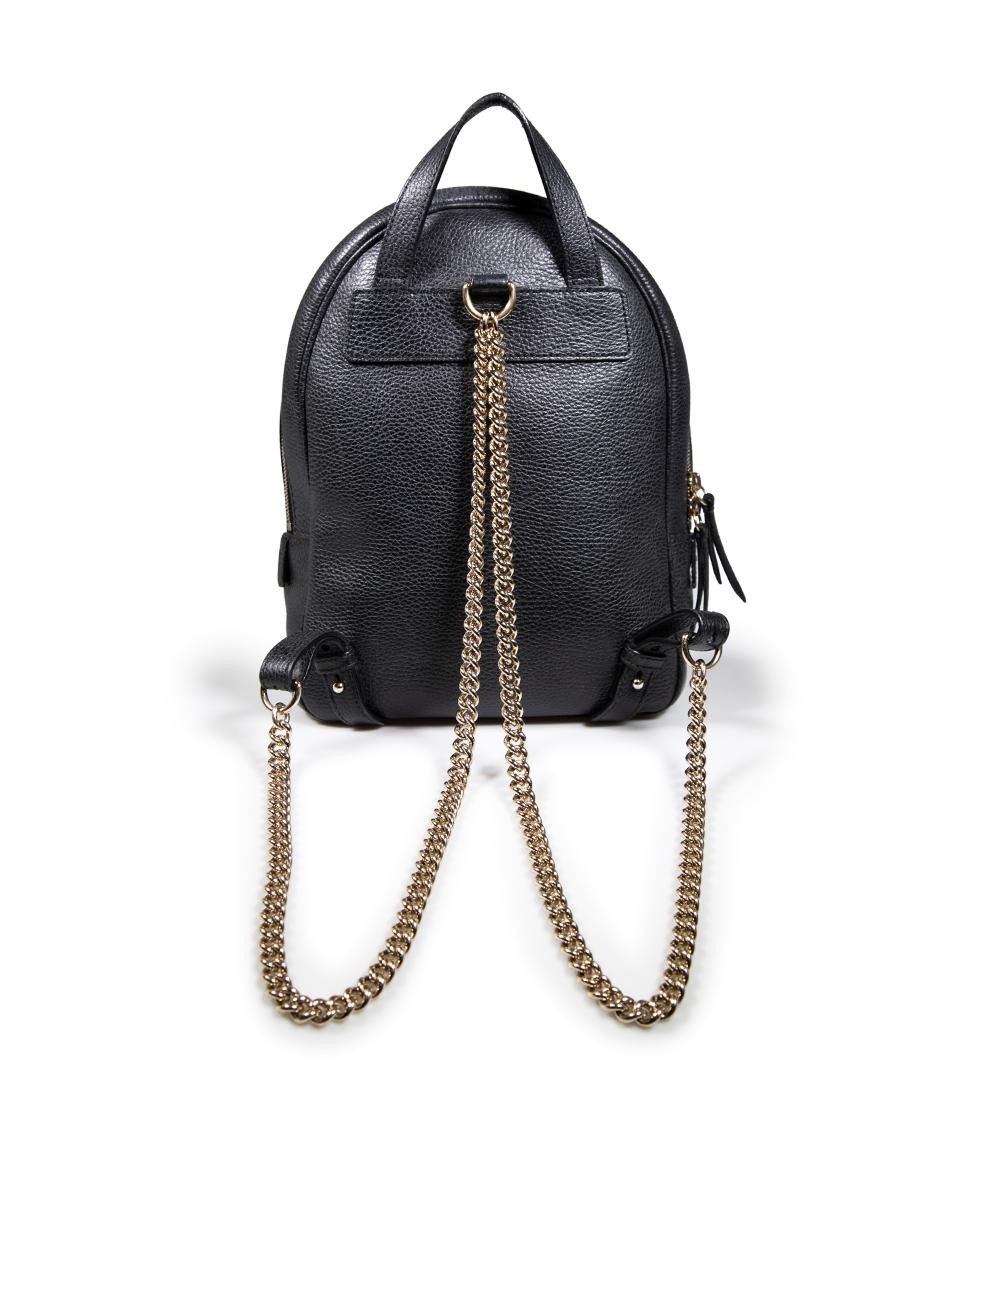 Gucci Black Leather Soho Chain Backpack In Good Condition For Sale In London, GB